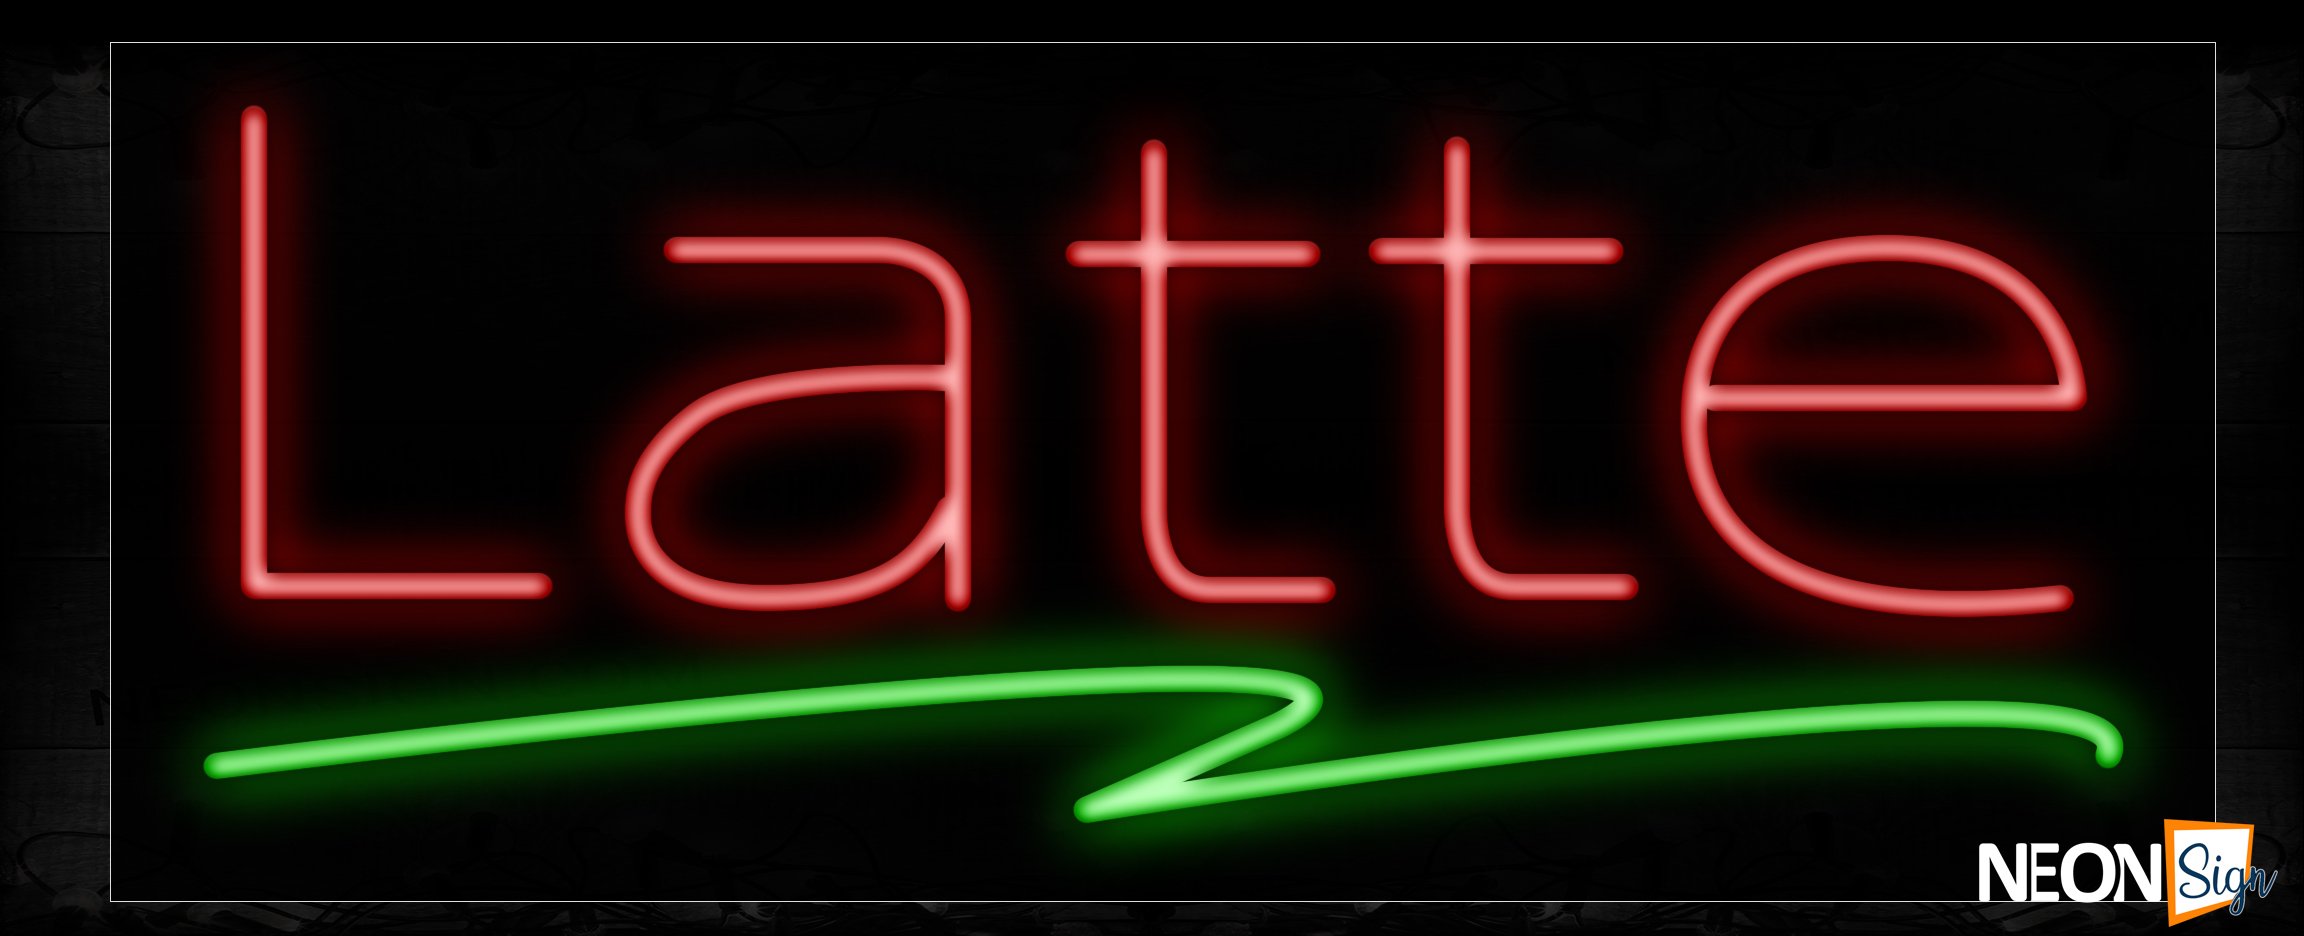 Image of 11203 Latte with green line Neon Sign_13x32 Black Backing